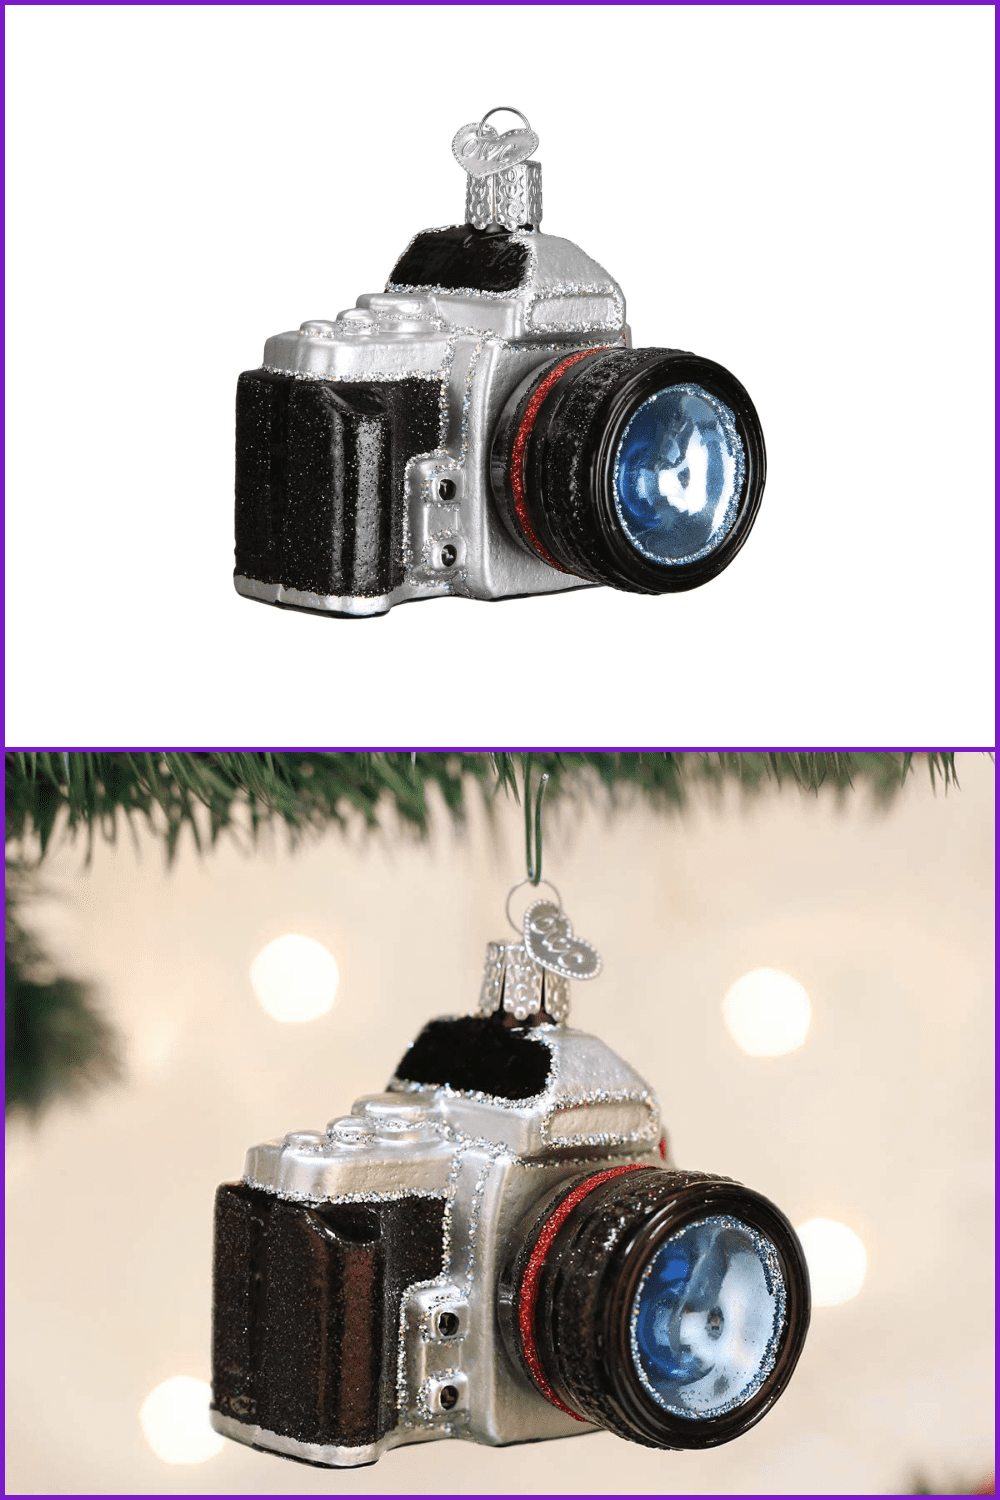 Collage from a photo of a Christmas tree in toy in the form of a film camera.